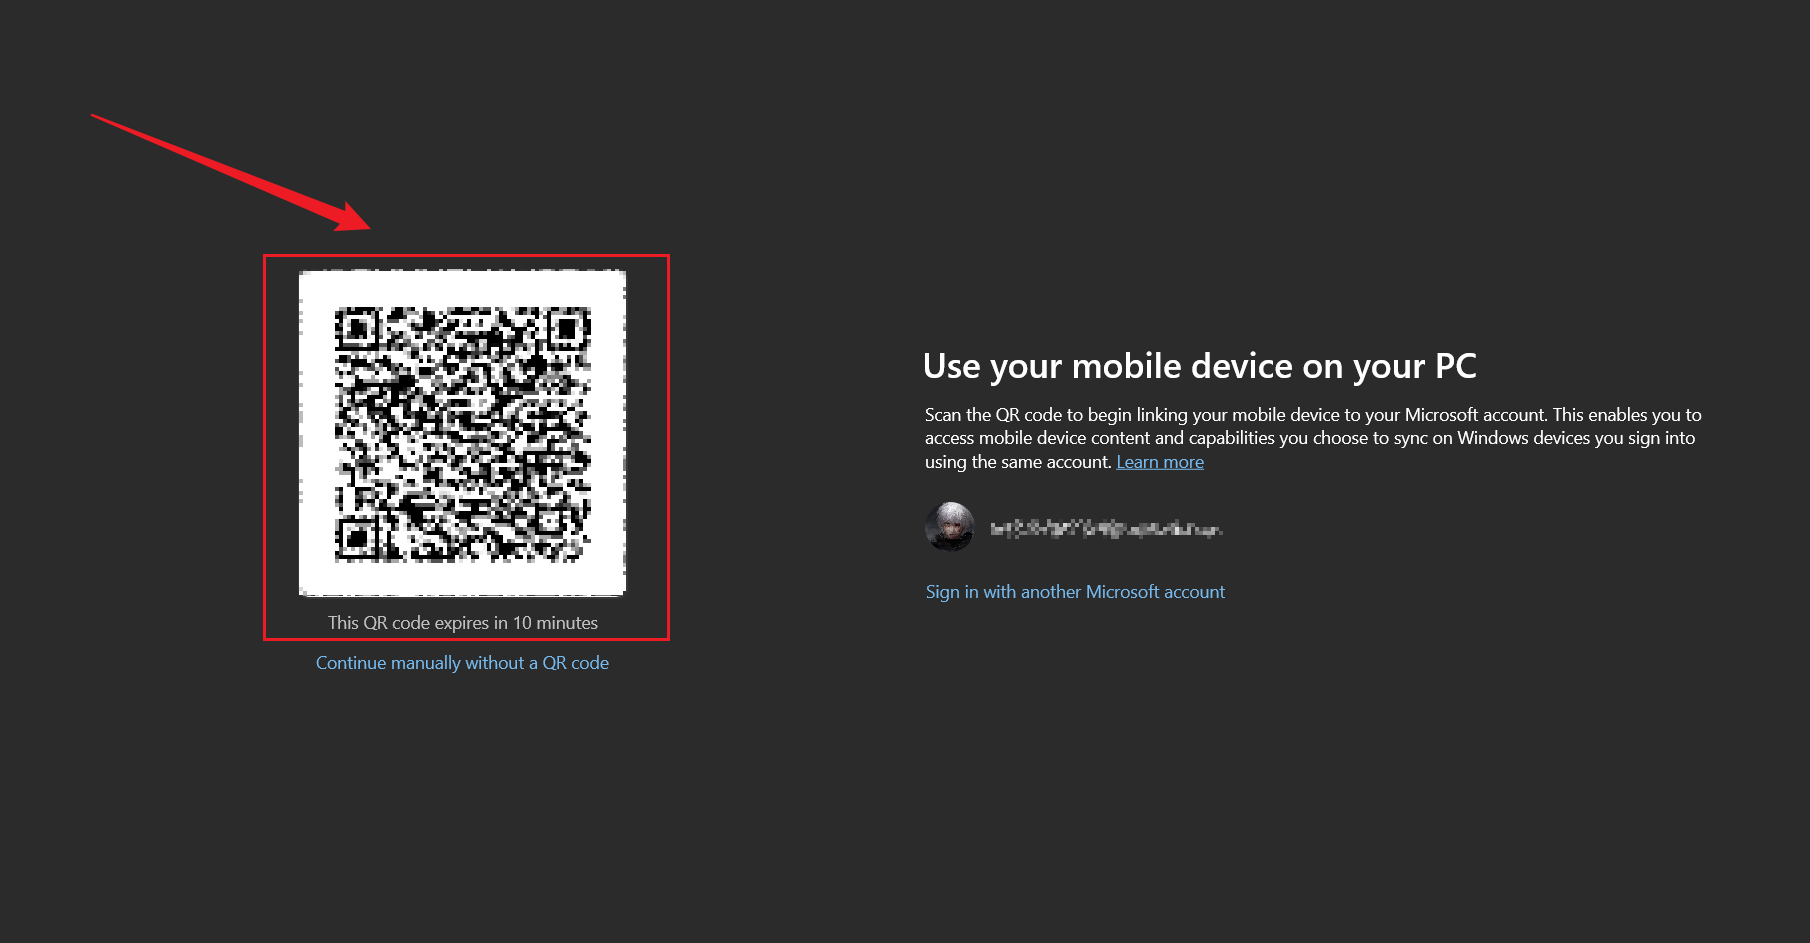 scan the QR code and pair your device